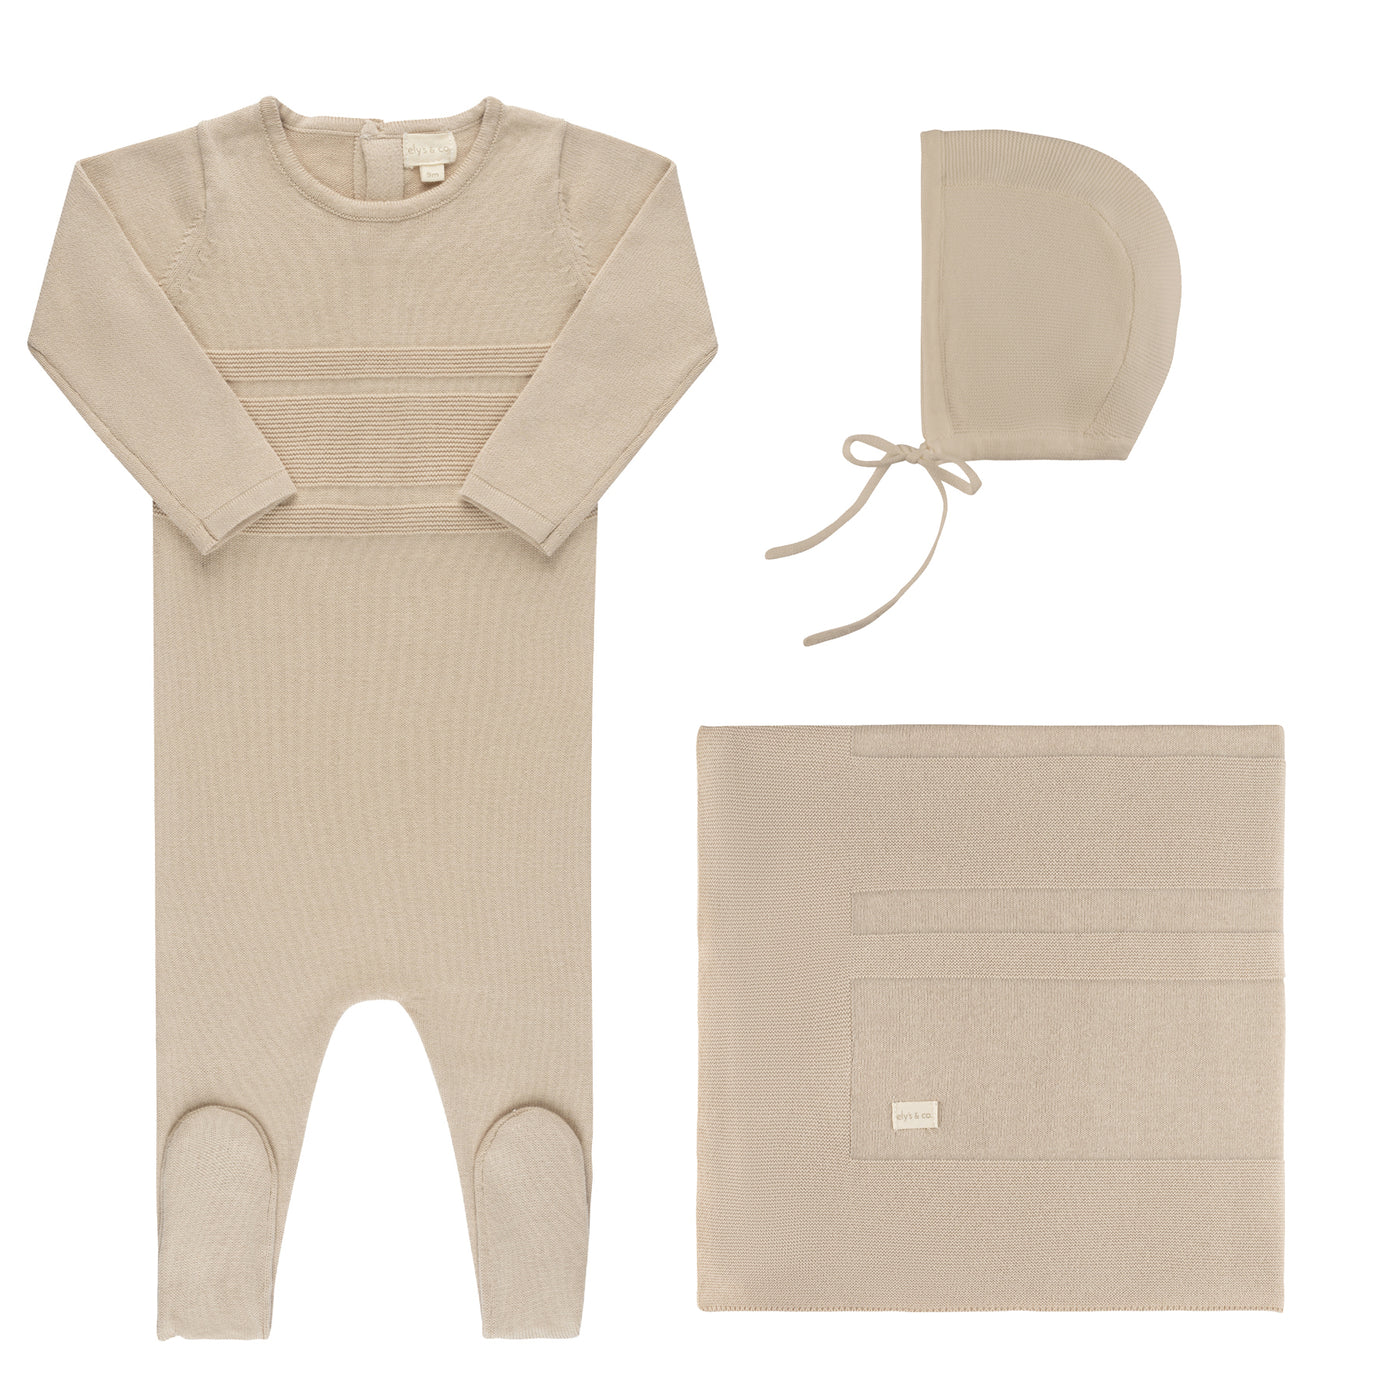 Ely's & Co. Raised Knit Taupe Three Piece Set